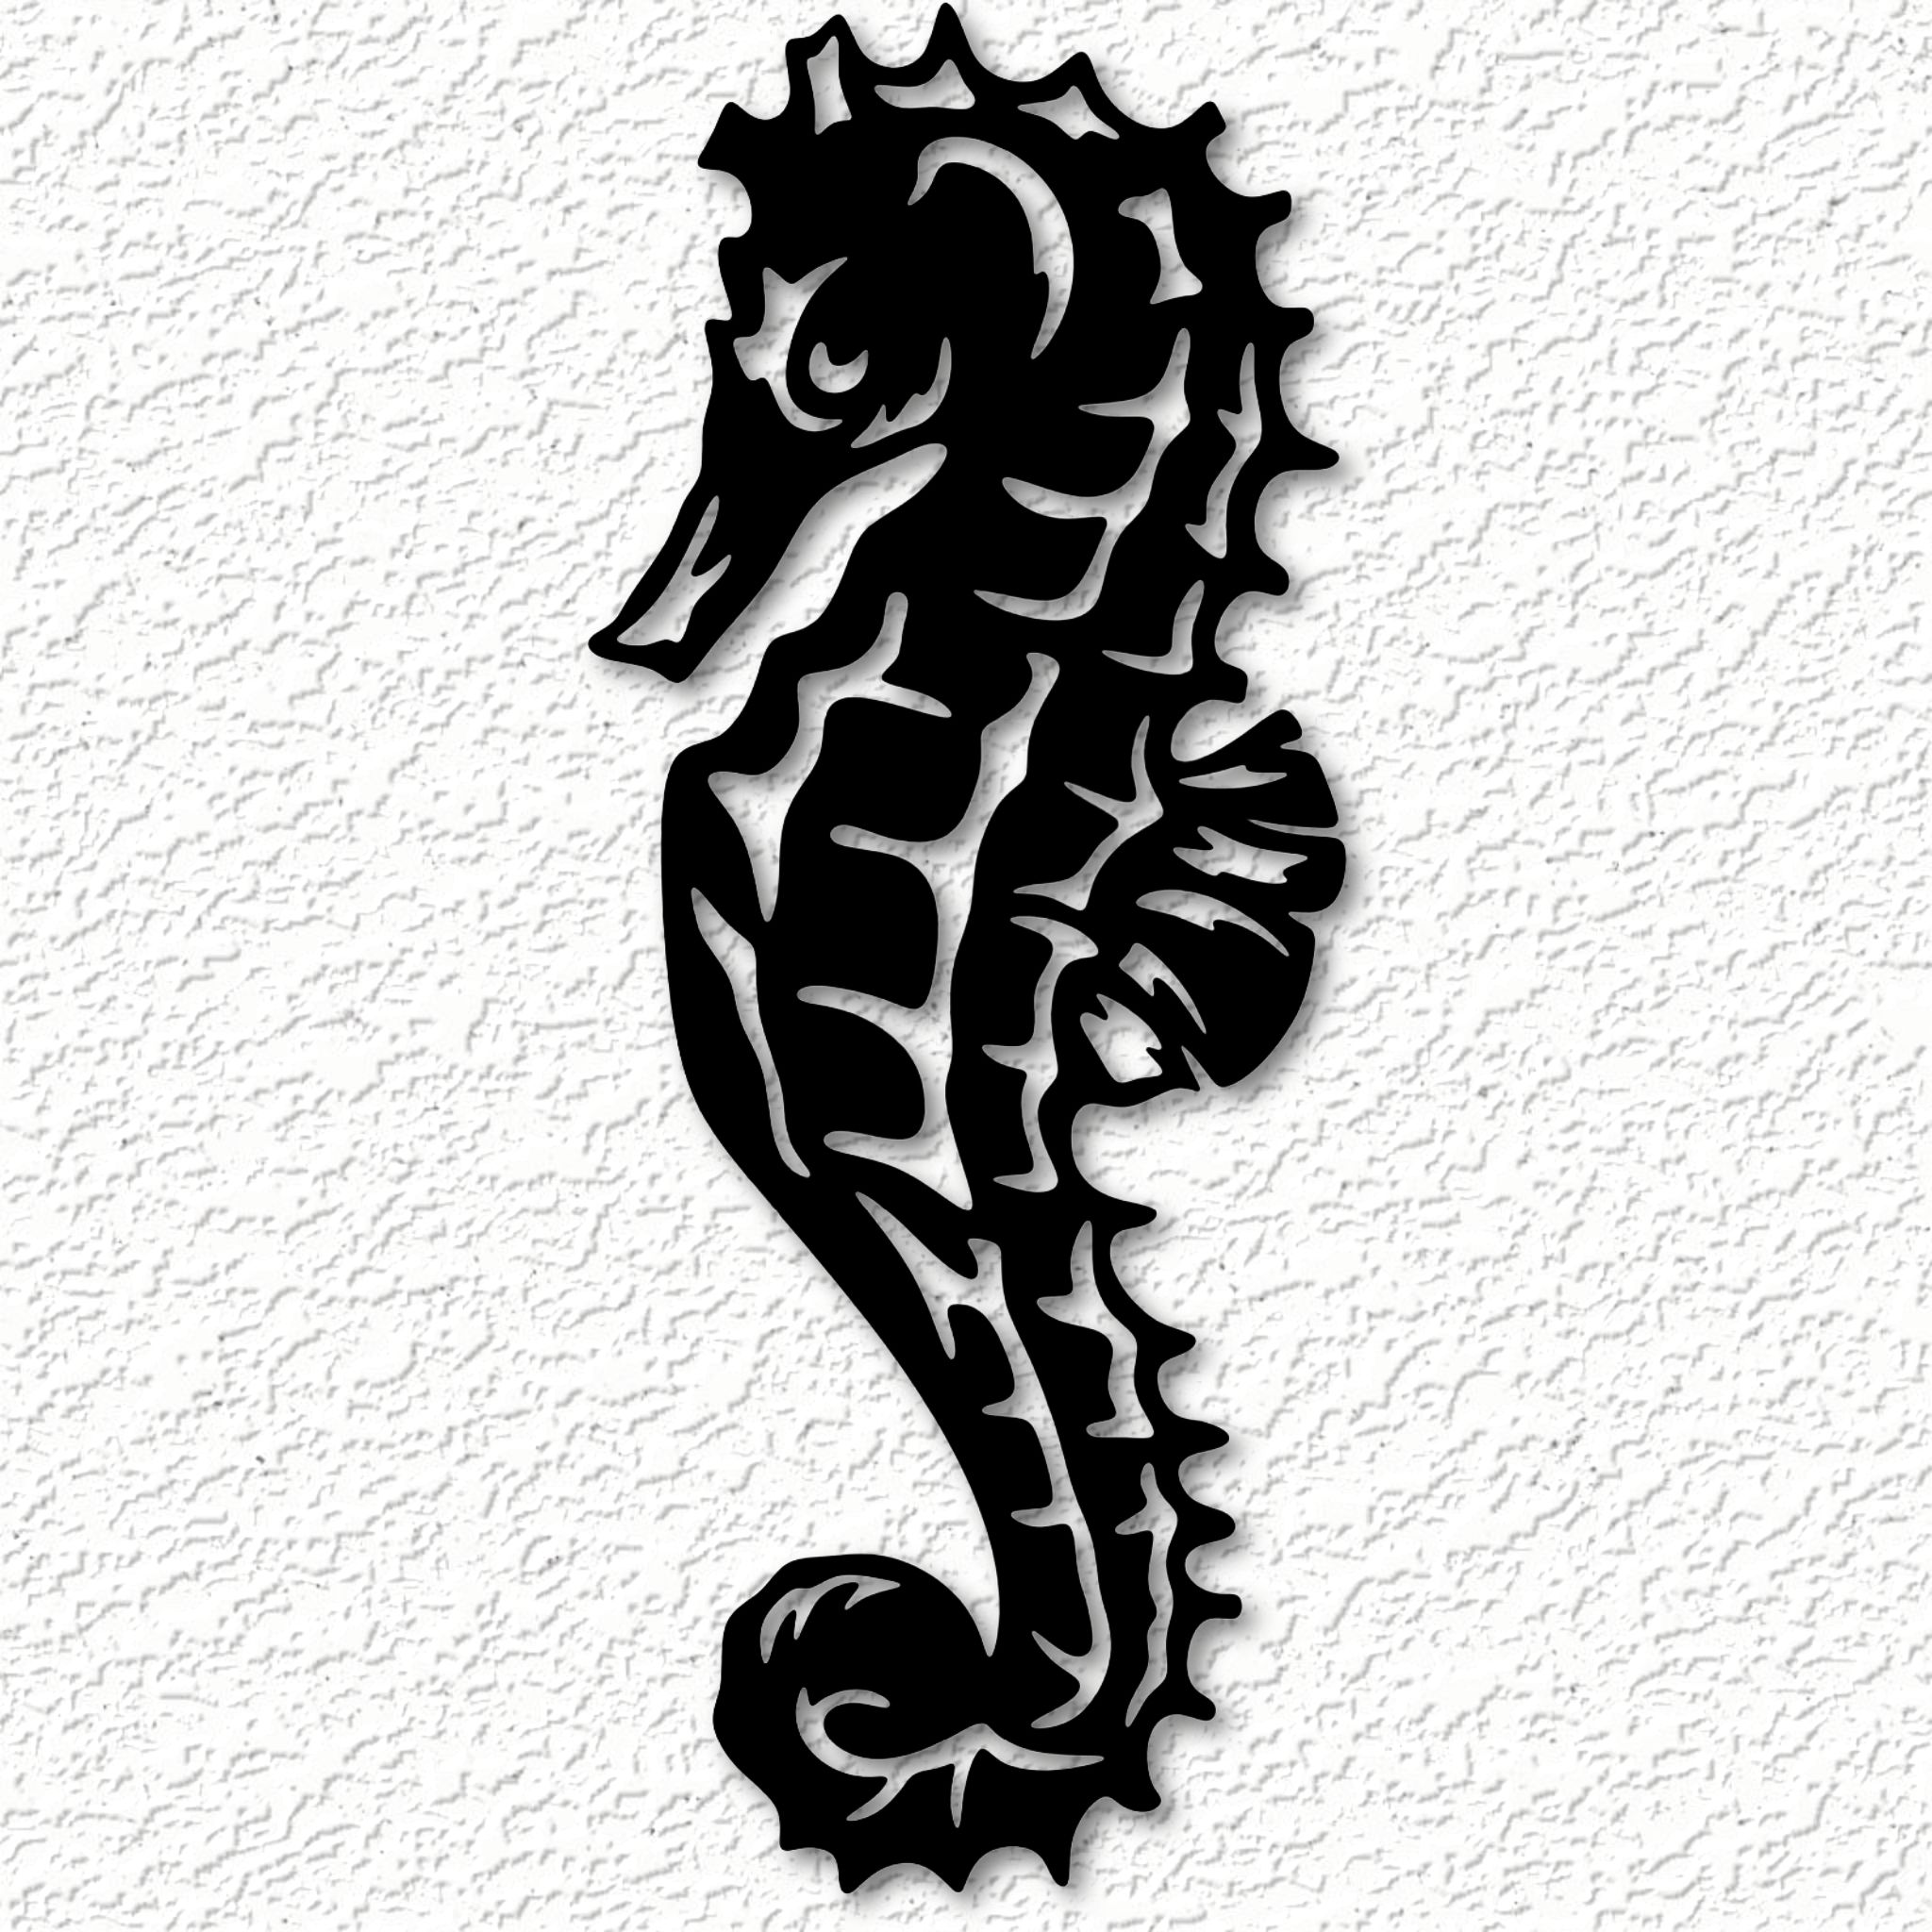 Stl File Realistic Seahorse Wall Art Sea Horse Wall Decor 2d Art  Animal?model To Download And 3d Print?cults For Newest Seahorse Wall Art (View 14 of 20)